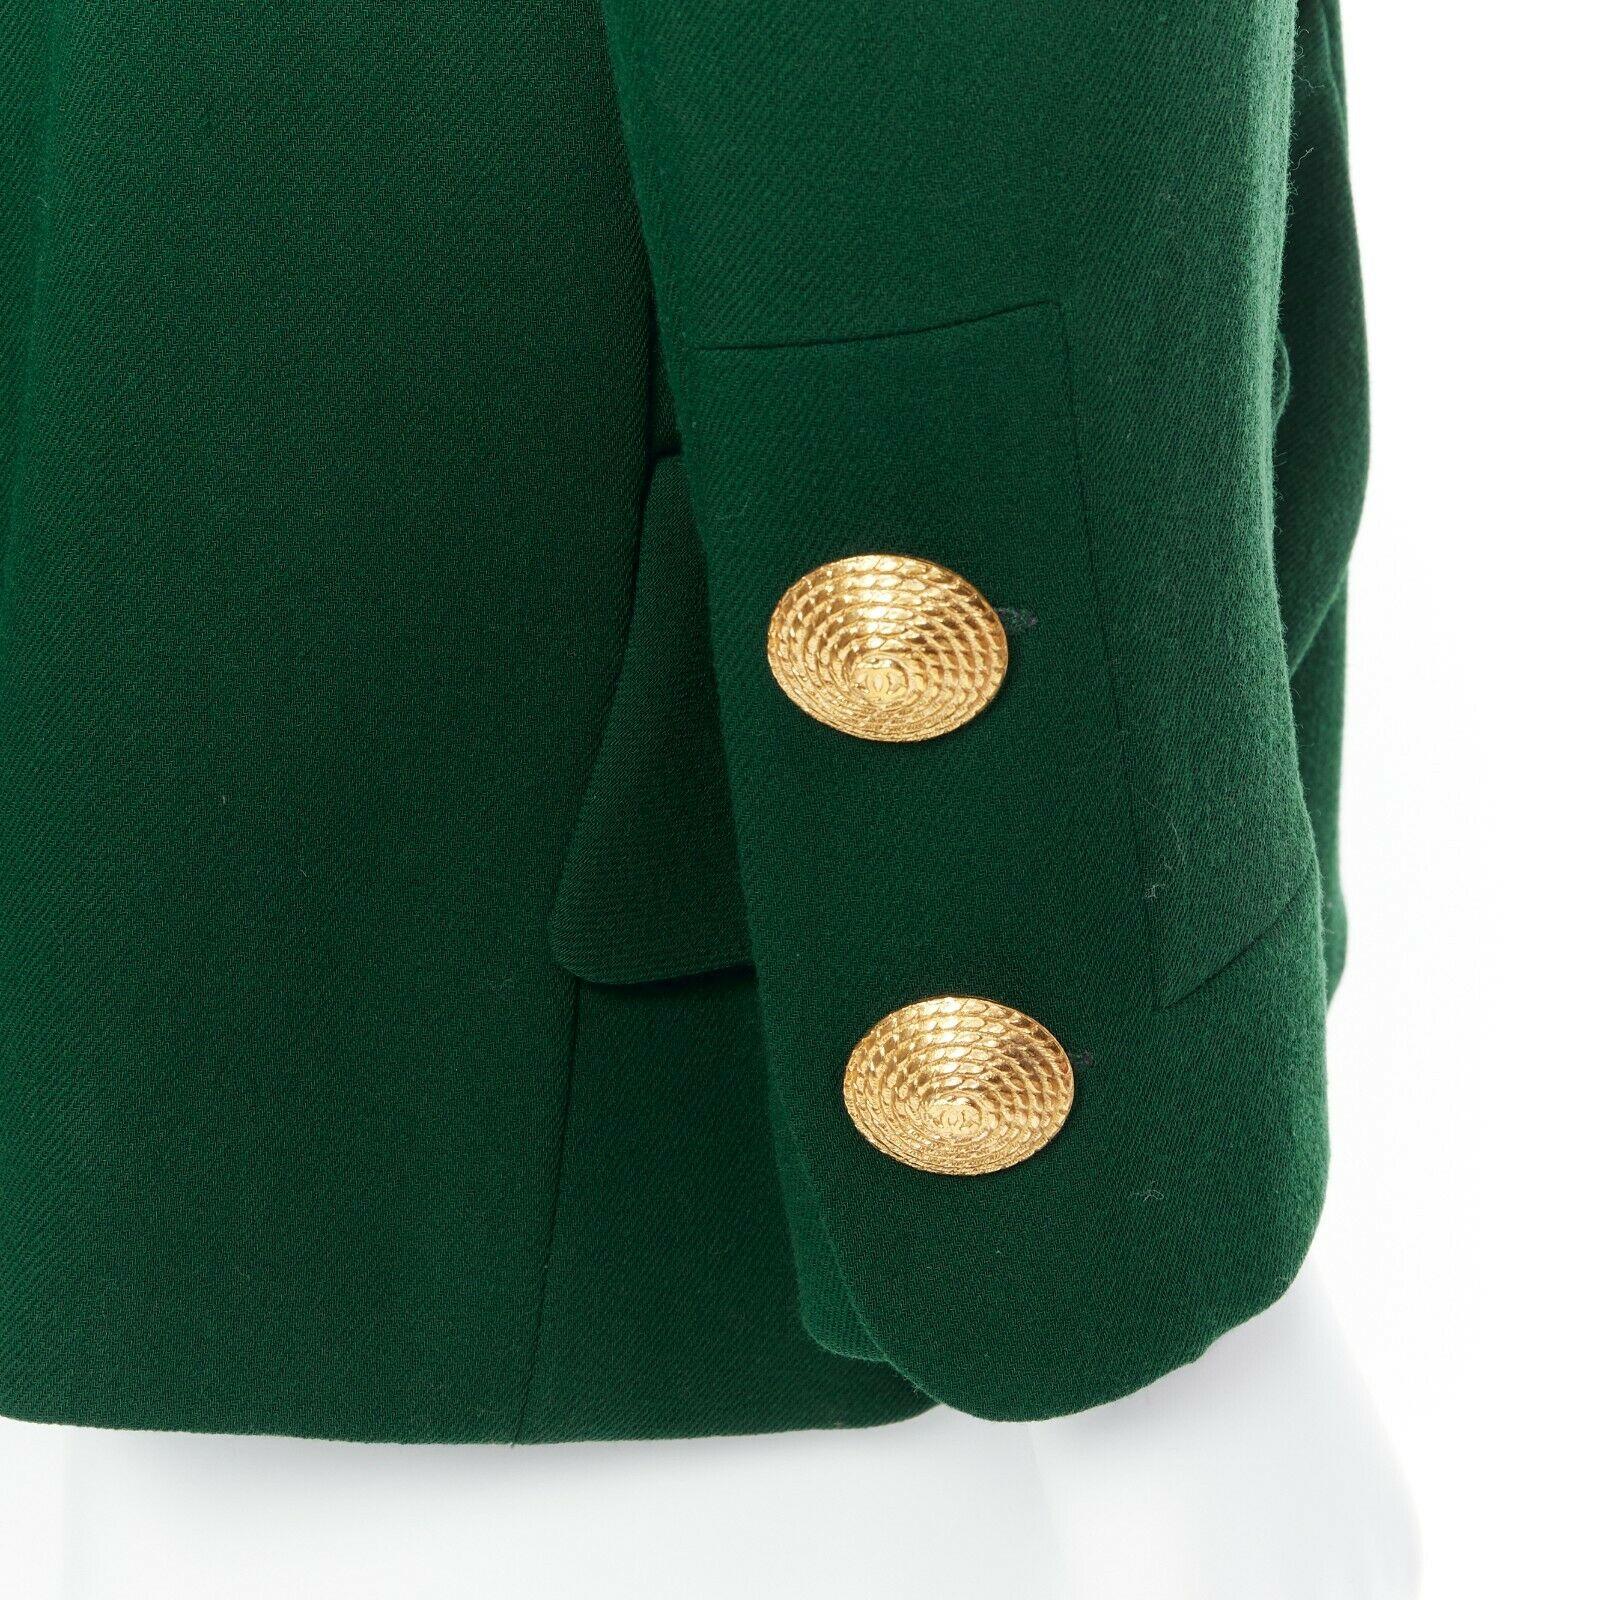 CHANEL 92A vintage emerald green 4 pockets gold buttons tailored jacket
Brand: CHANEL
Designer: Karl Lagerfeld
Collection: 92A
Model Name / Style: Talored jacket
Material: Other
Color: Green
Pattern: Solid
Closure: Button
Lining material: Silk
Extra